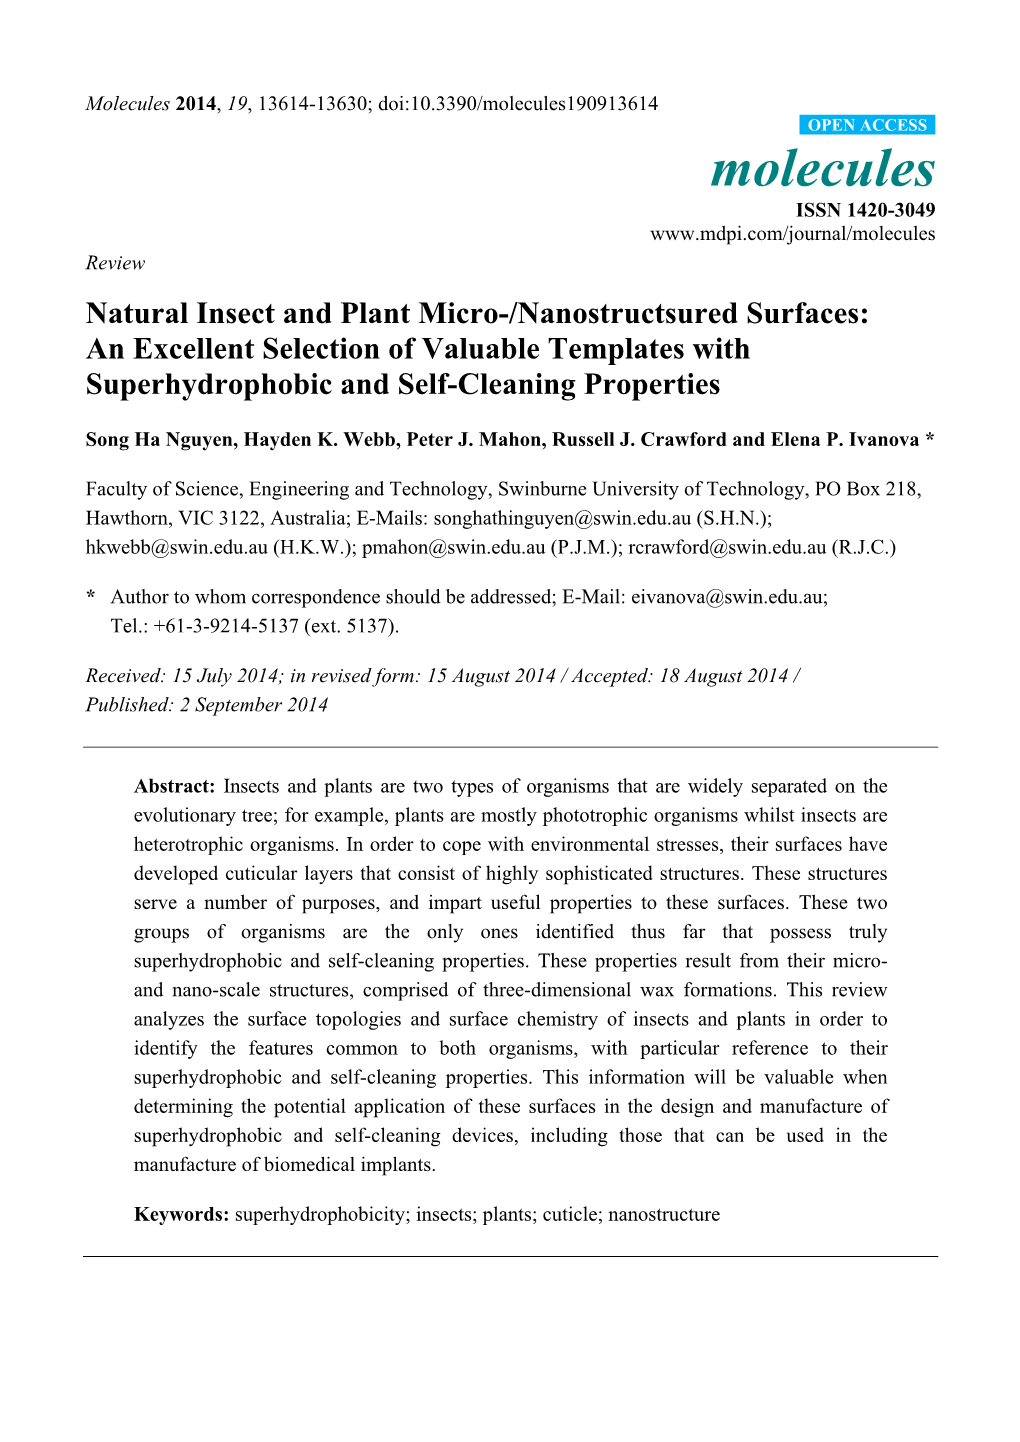 Natural Insect and Plant Micro-/Nanostructsured Surfaces: an Excellent Selection of Valuable Templates with Superhydrophobic and Self-Cleaning Properties